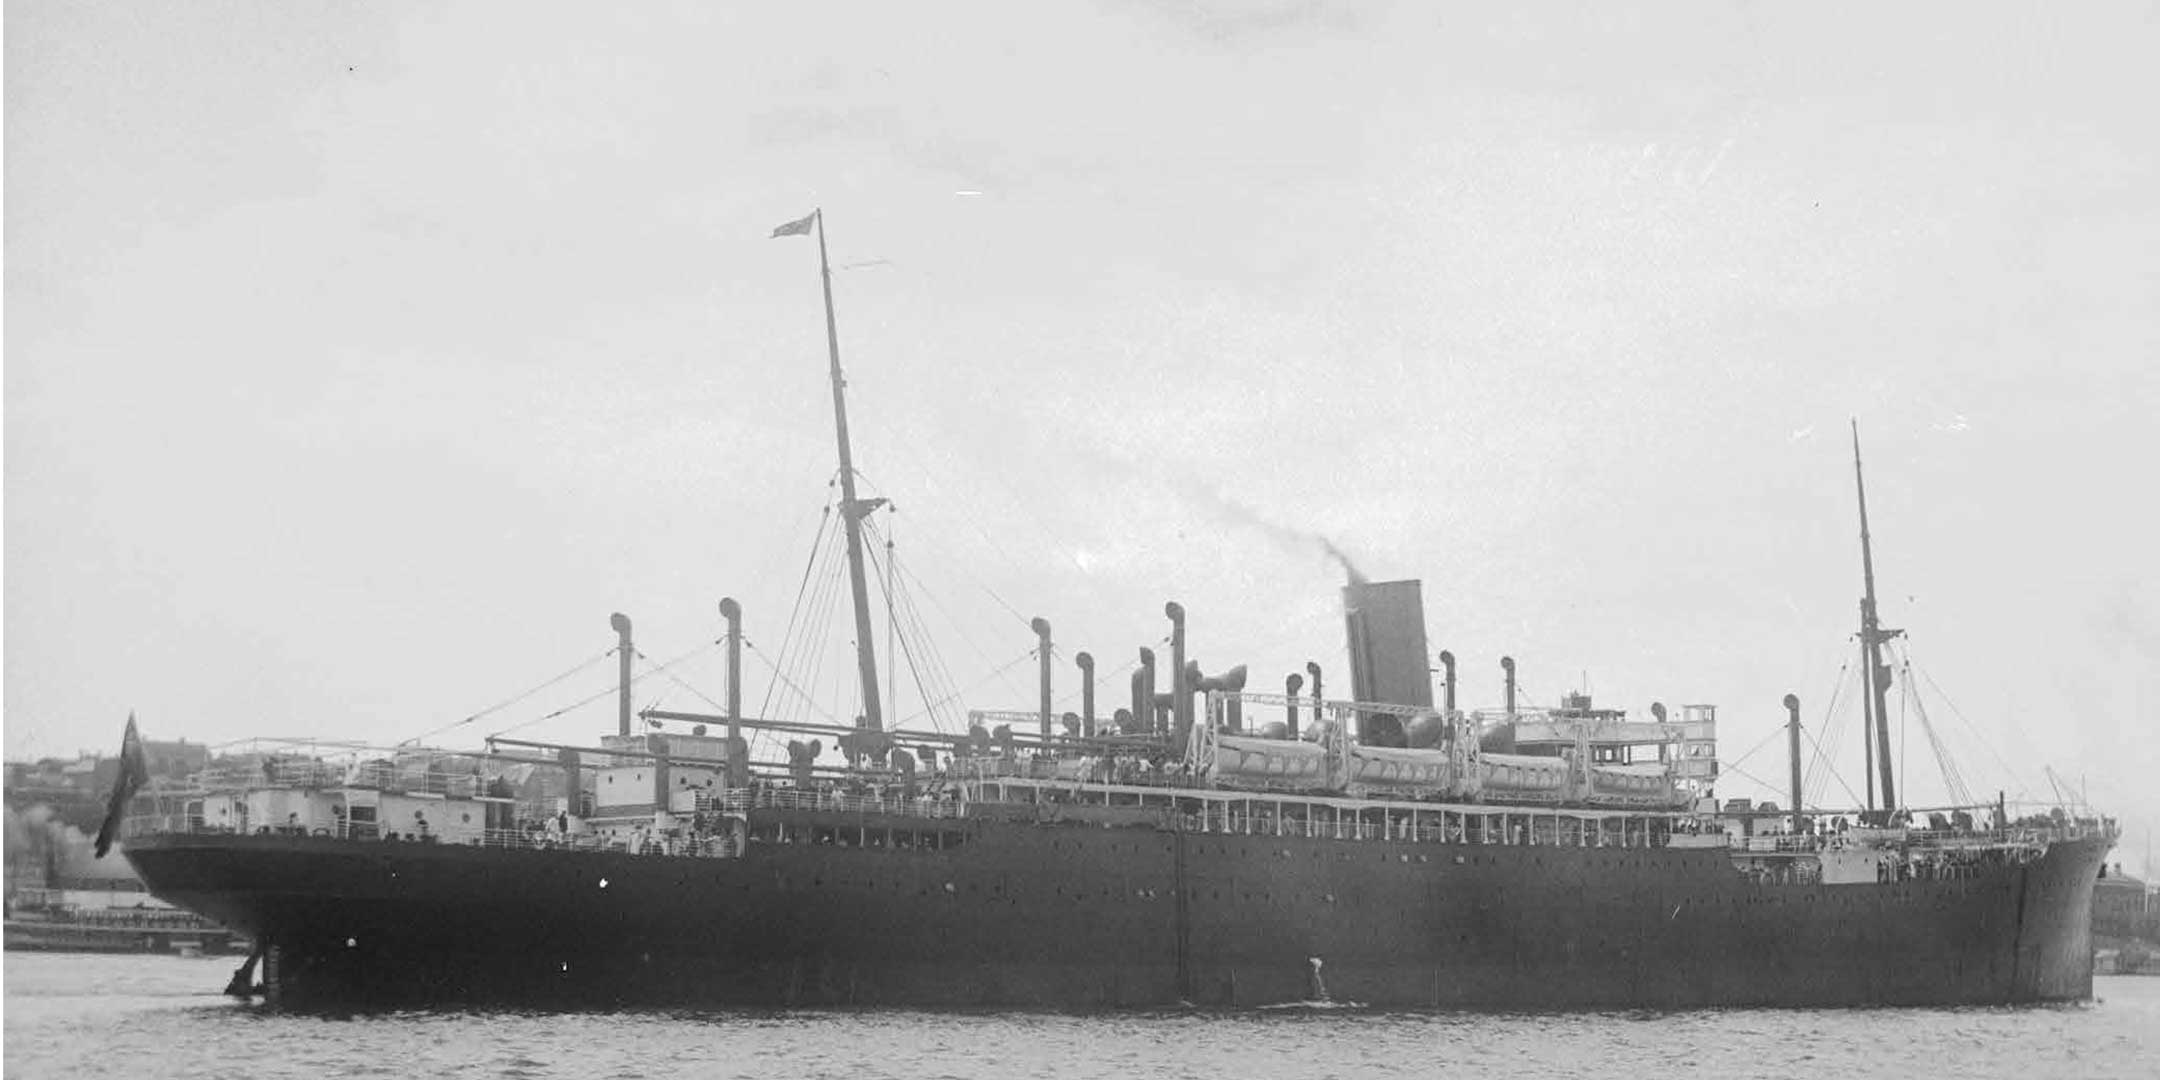 SS Moreton Bay was one of the vessels chartered by the Dutch government-in-exile that was affected by the waterside workers black bans. ANMM Collection